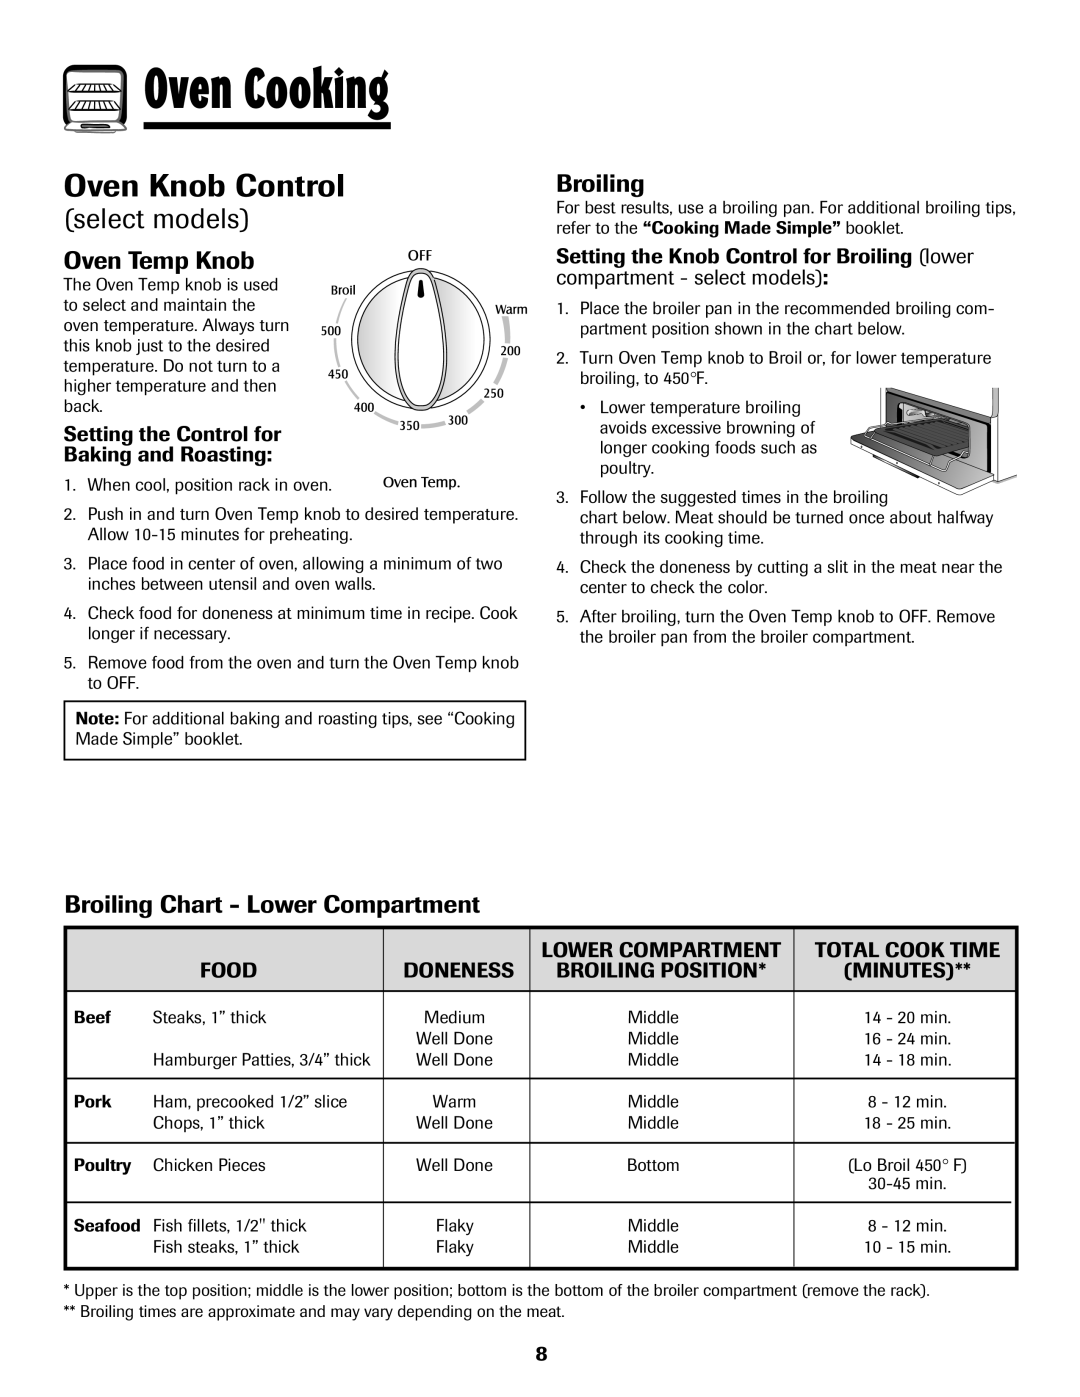 Maytag 8113P424-60 Oven Knob Control, select models, Oven Temp Knob, Broiling Chart - Lower Compartment, Food, Minutes 